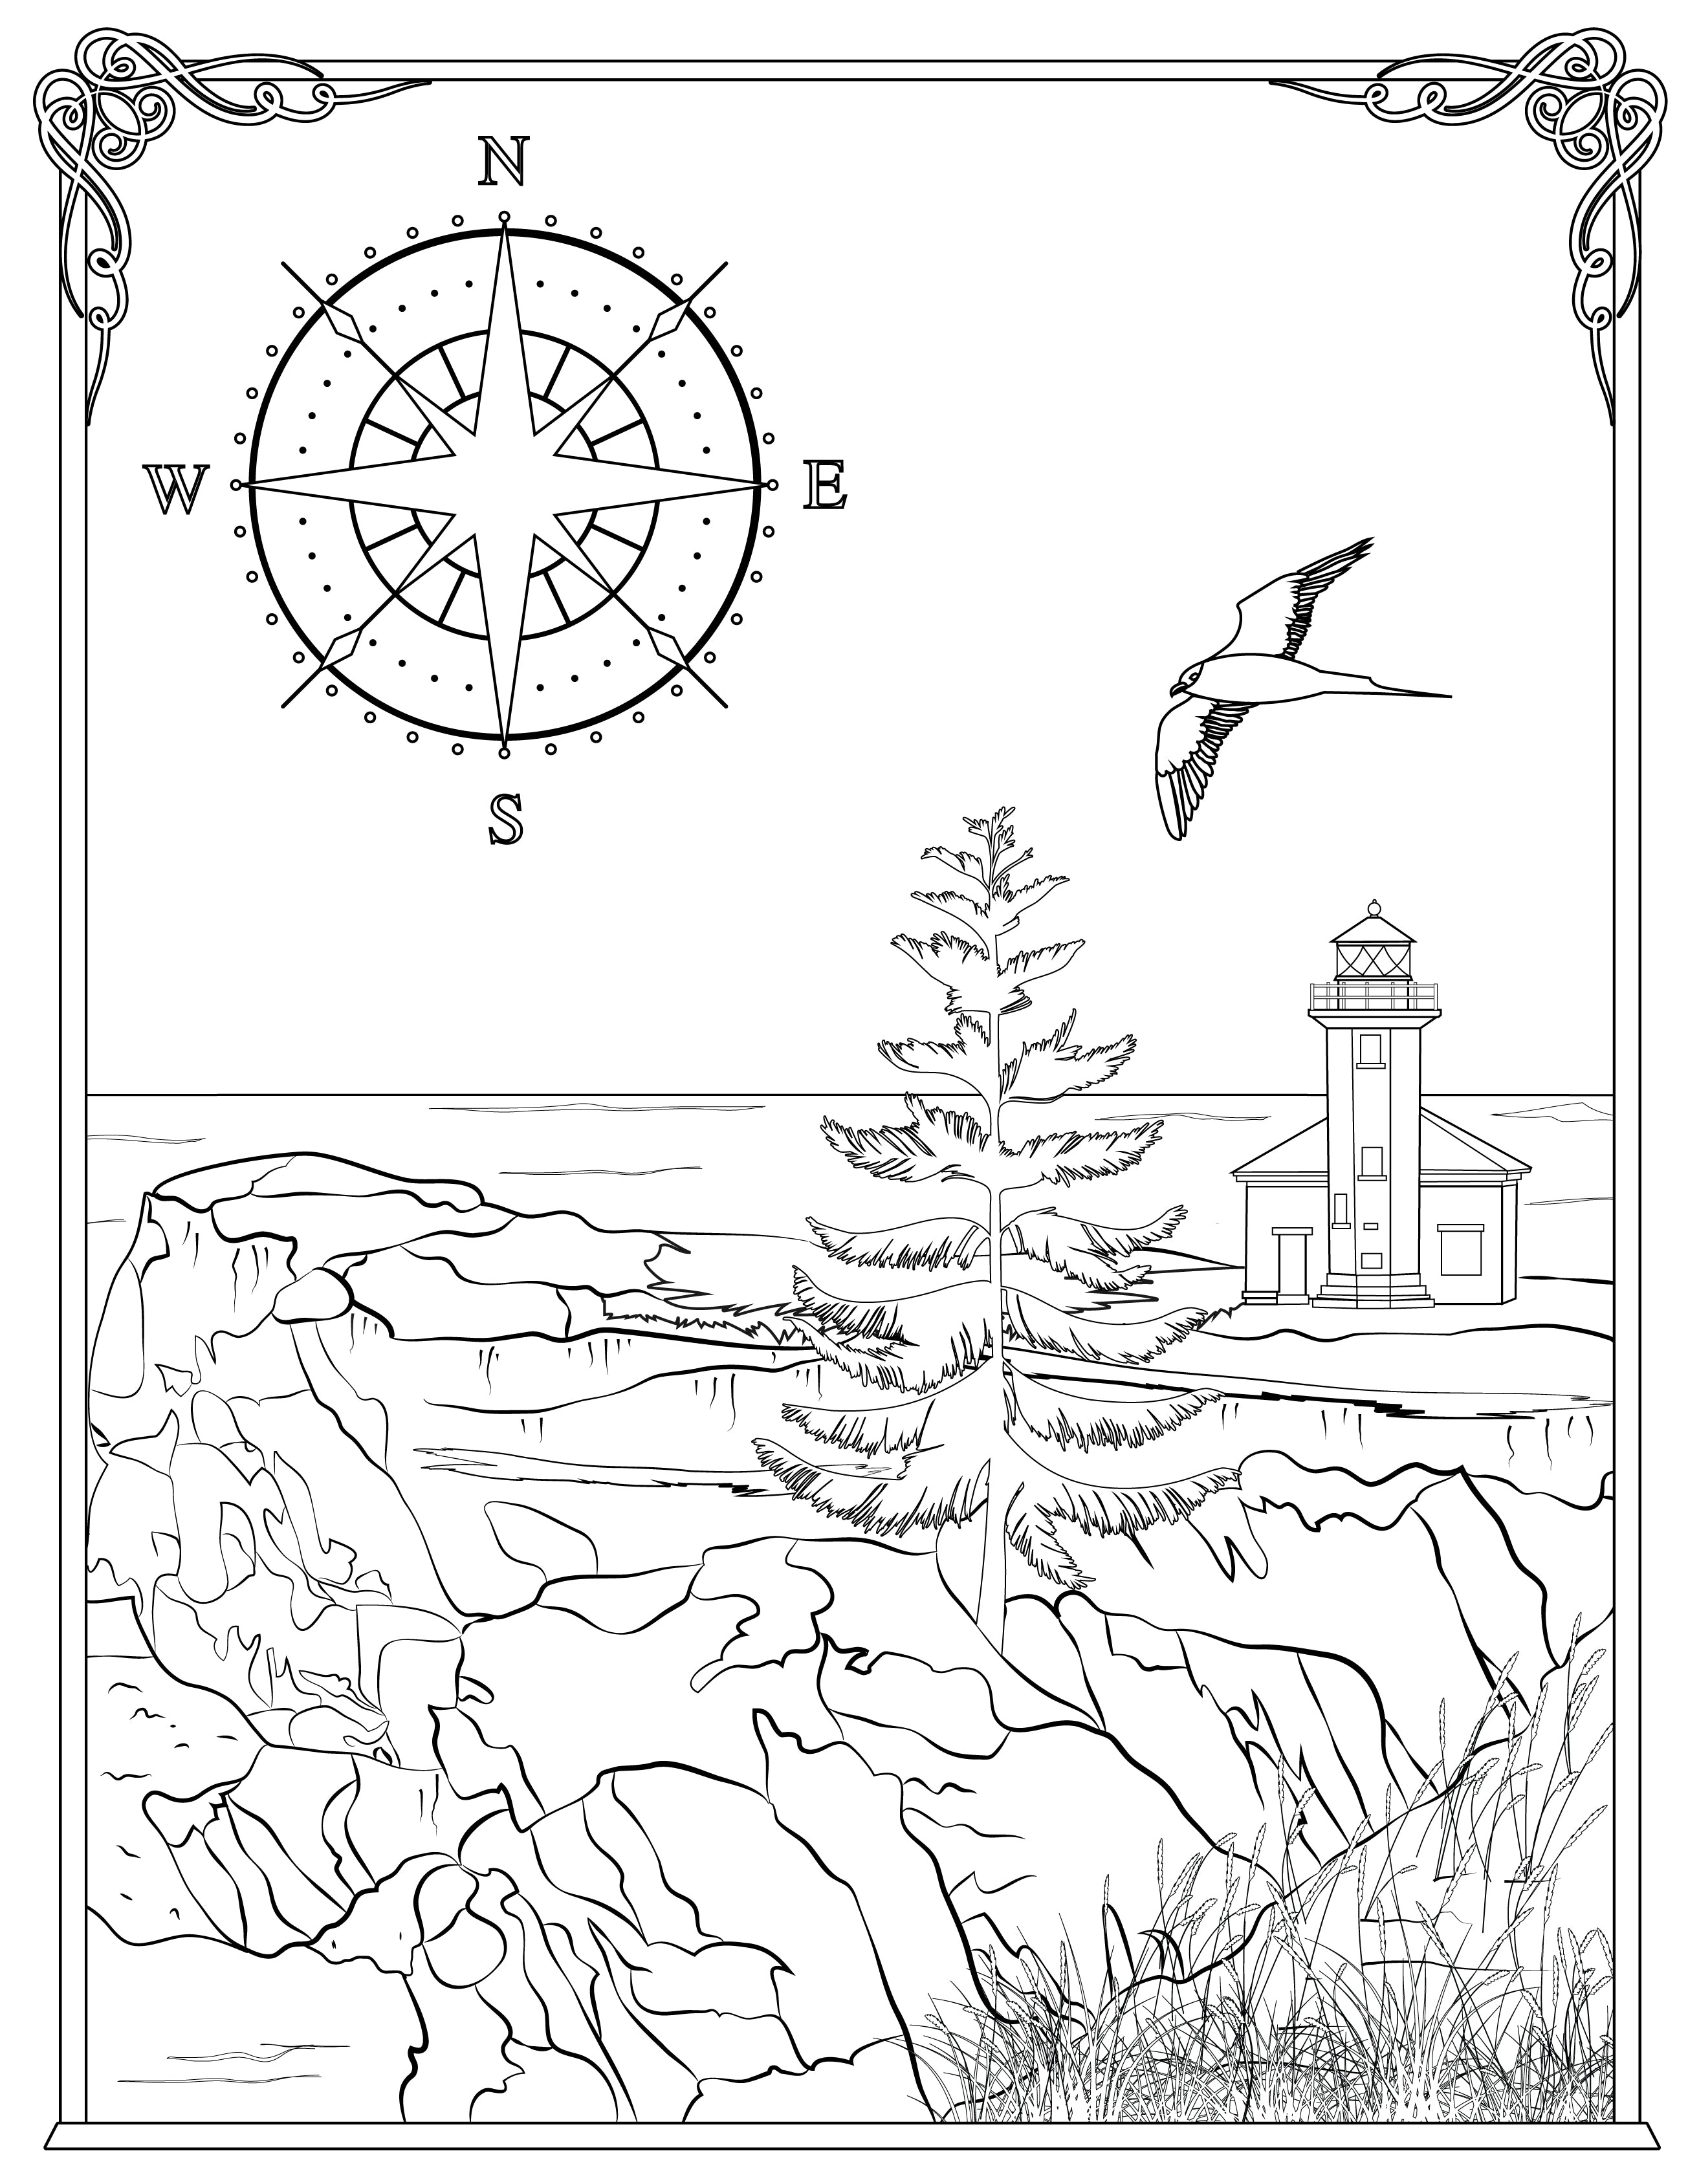 Single Coloring Book Page - Cape Arago Lighthouse, Oregon - Digital Print-from-Home